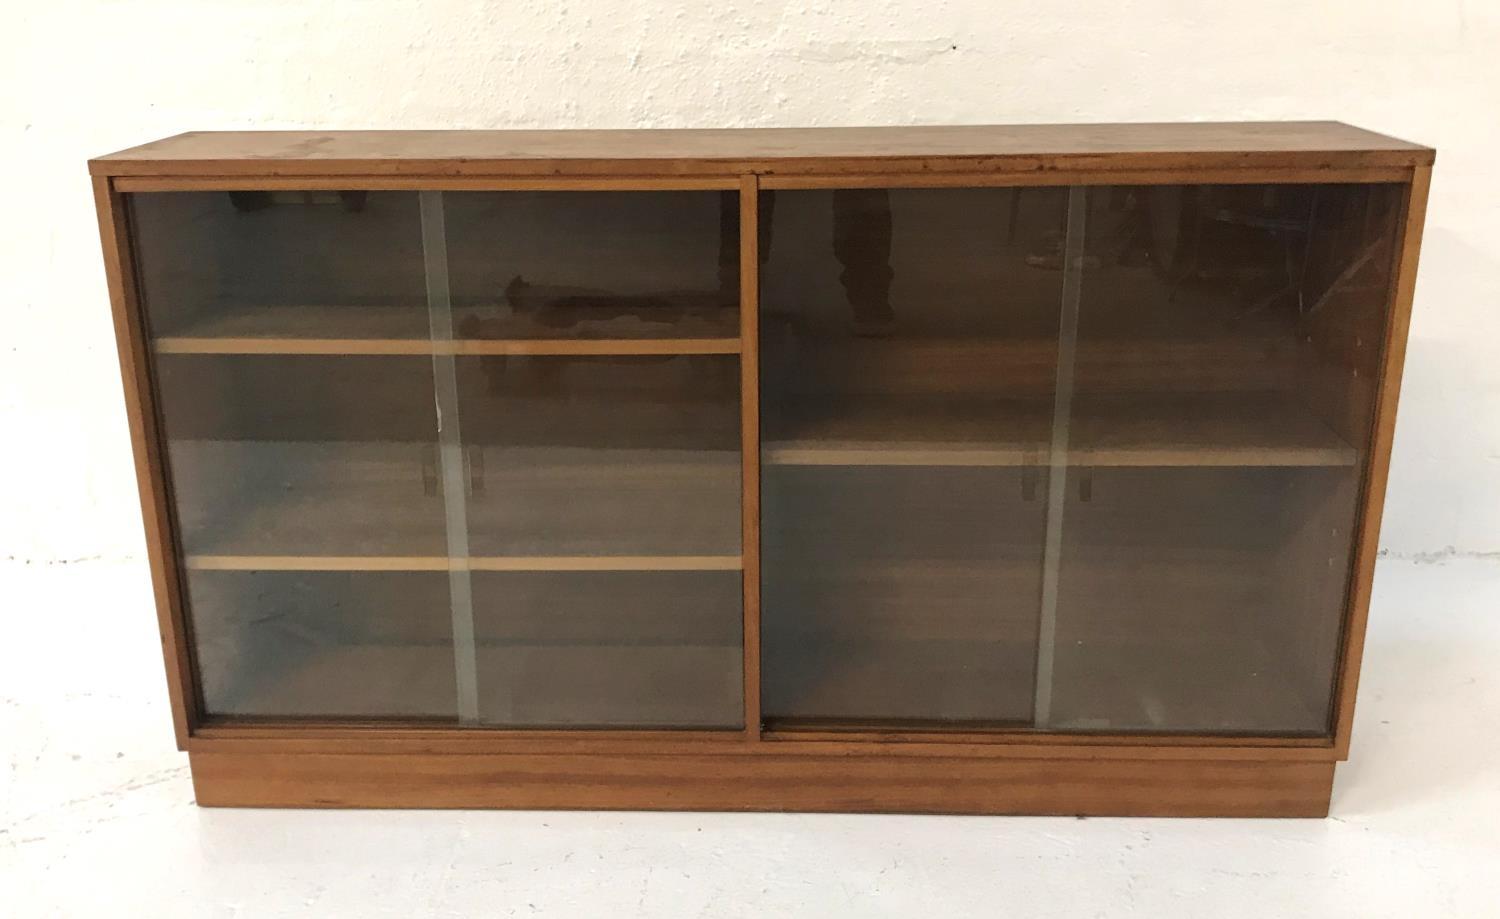 TEAK CABINET with a rectangular top above two pairs of glass sliding doors with a shelved